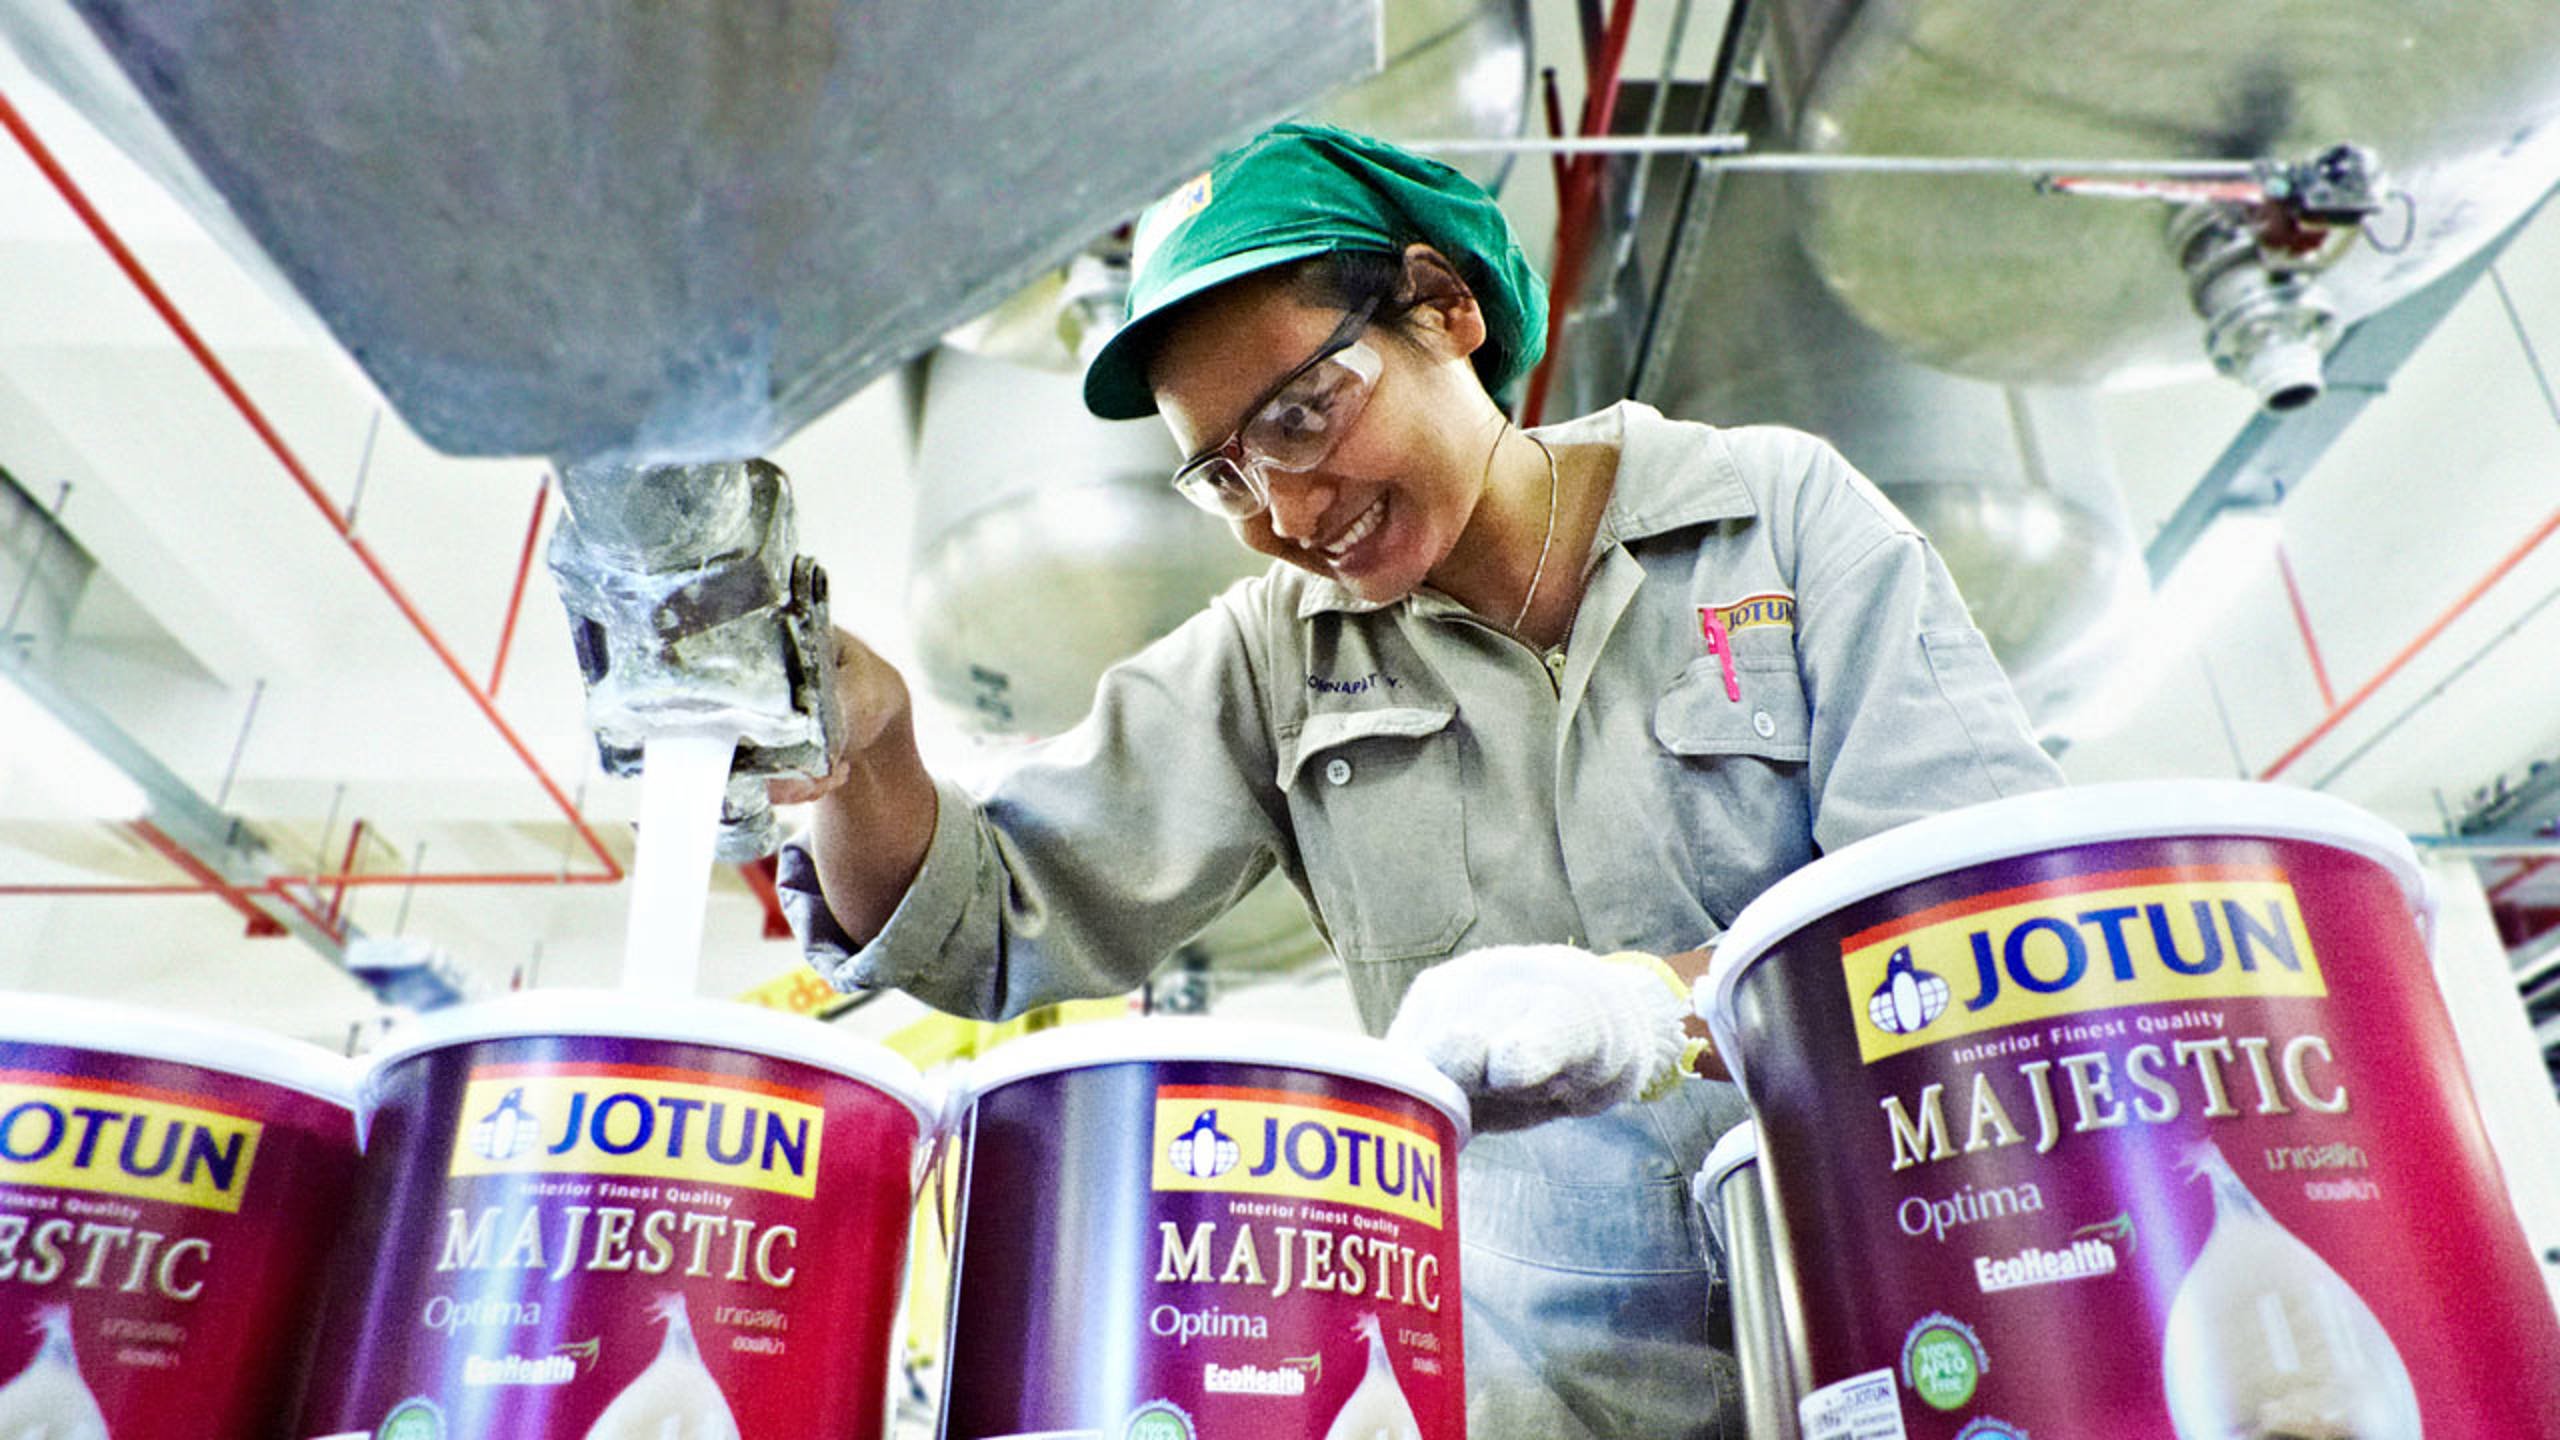 Jotun's R&D efforts in Thailand are housed in the regional laboratory, which first opened in 1999. Here is one of the many female employees in the Jotun family.